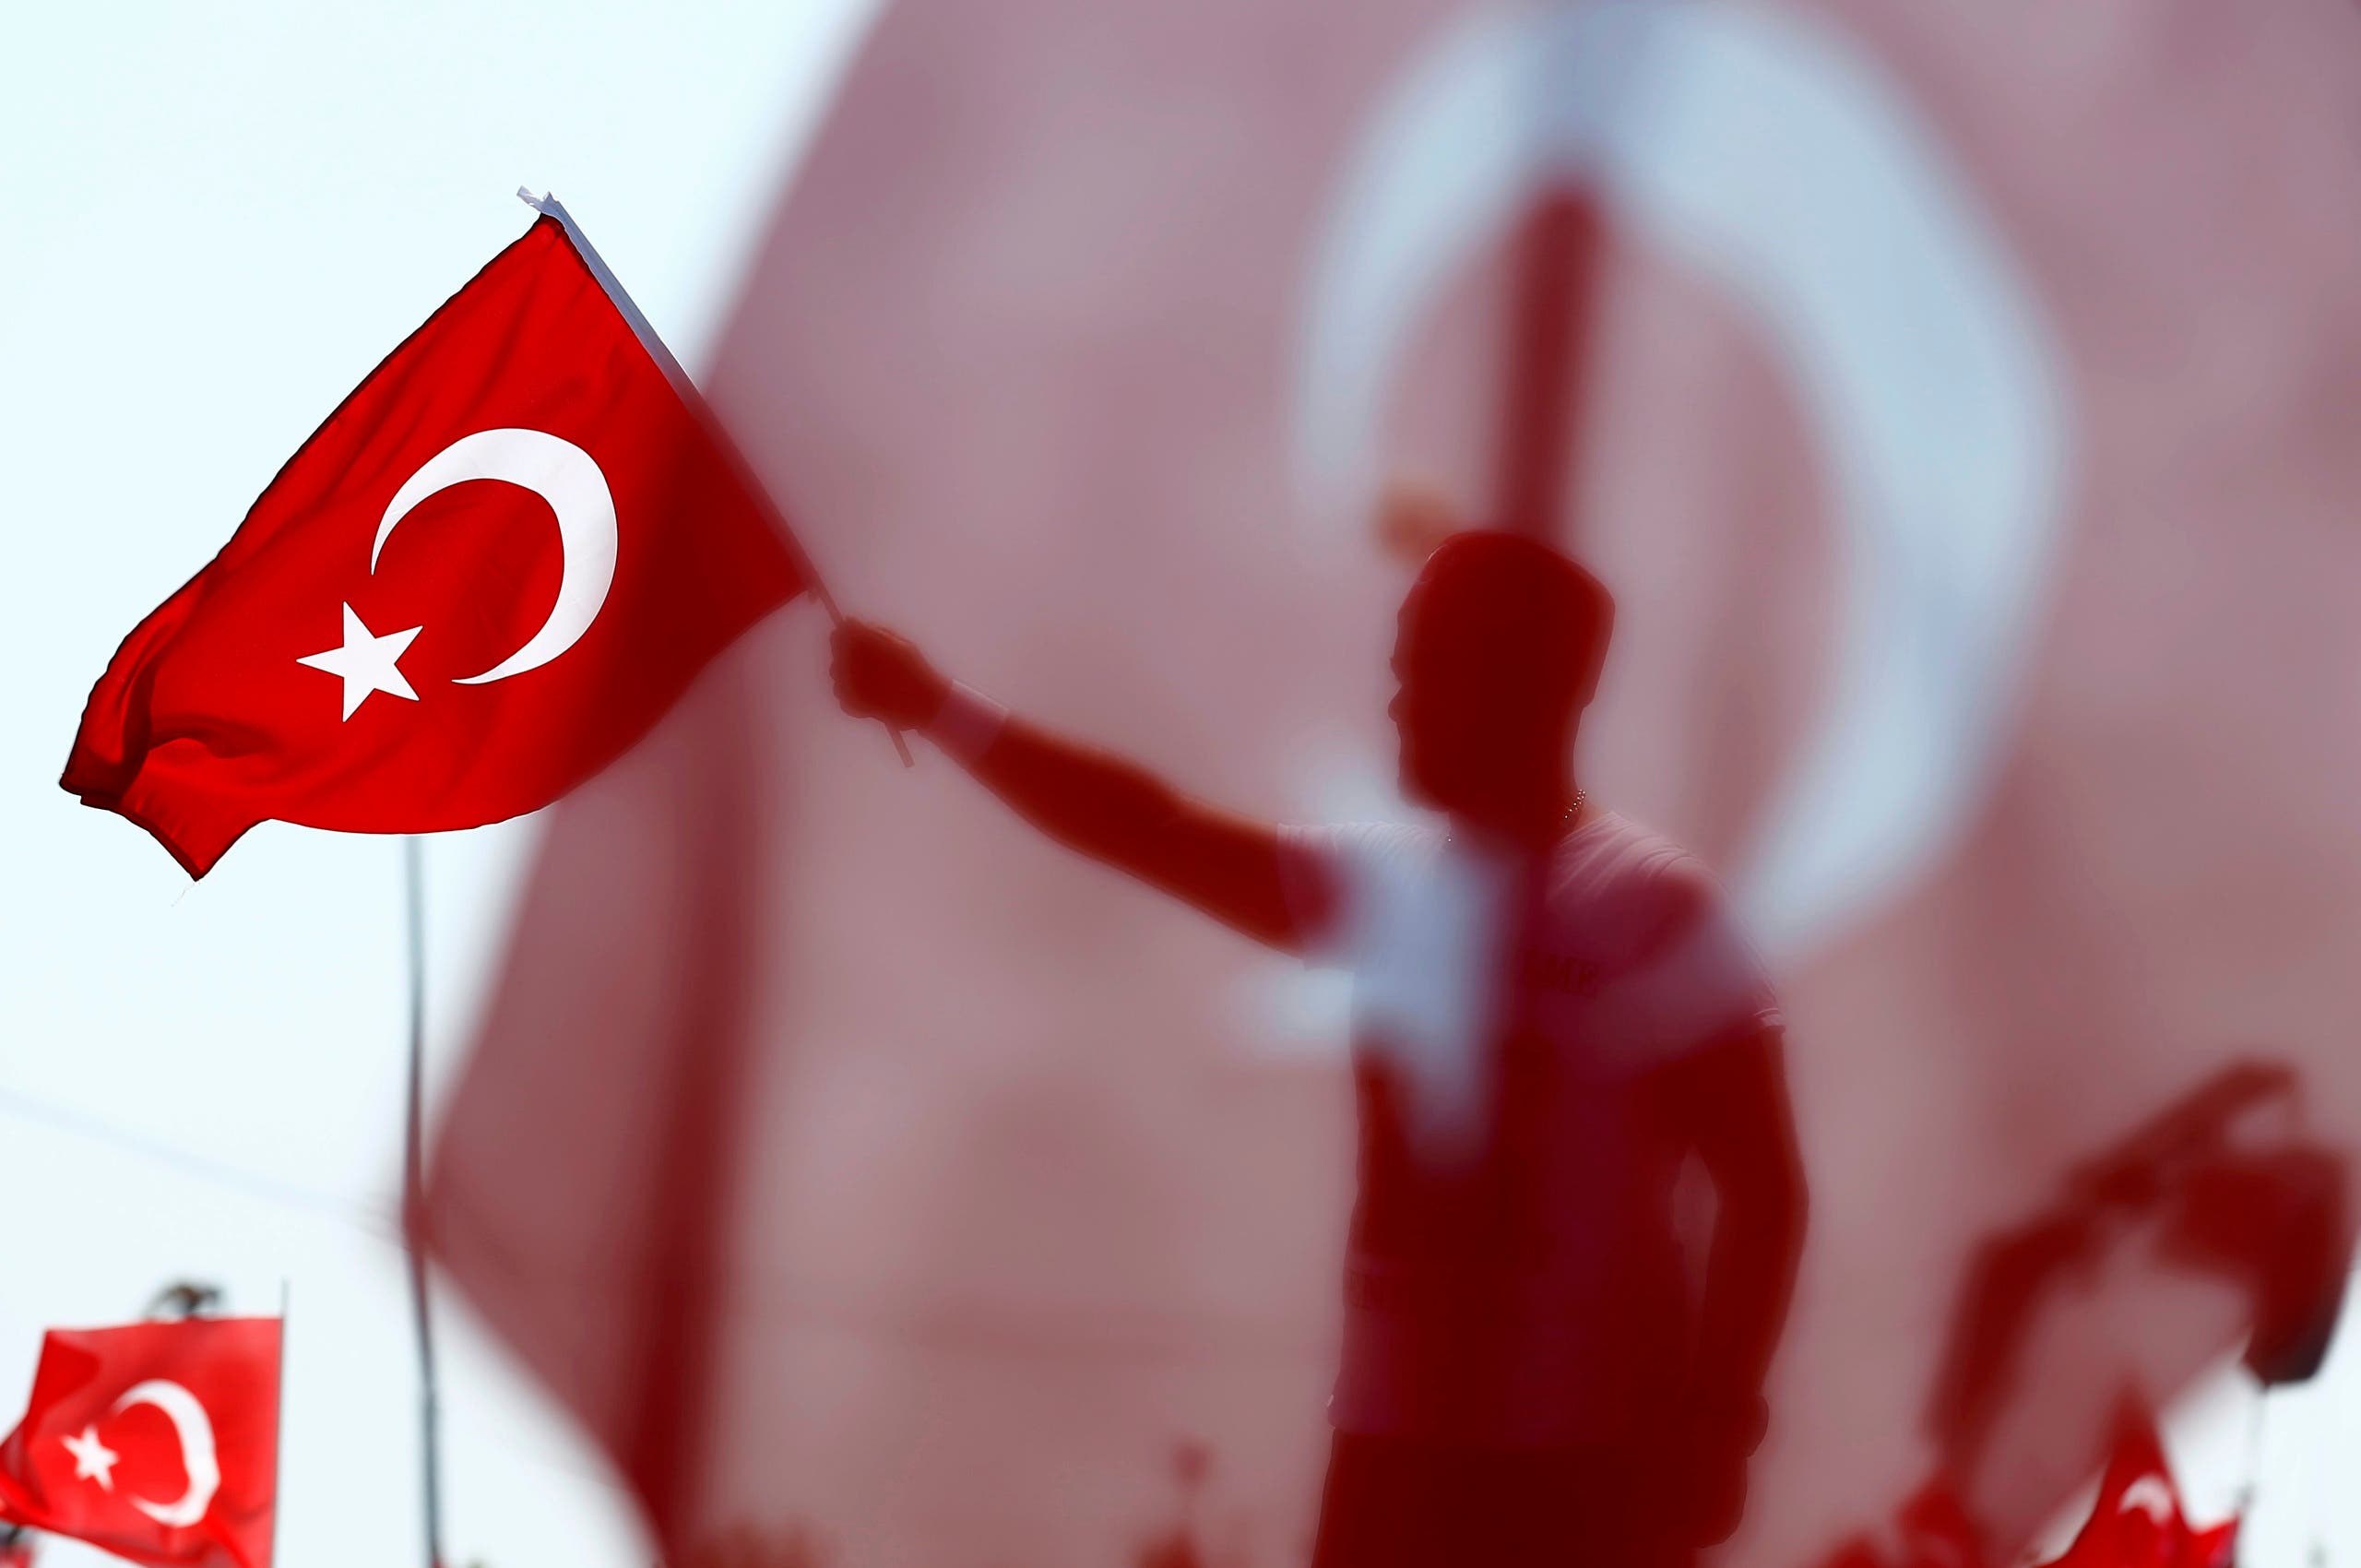 A man waves Turkey's national flag during the Democracy and Martyrs Rally in Istanbul. (Reuters)